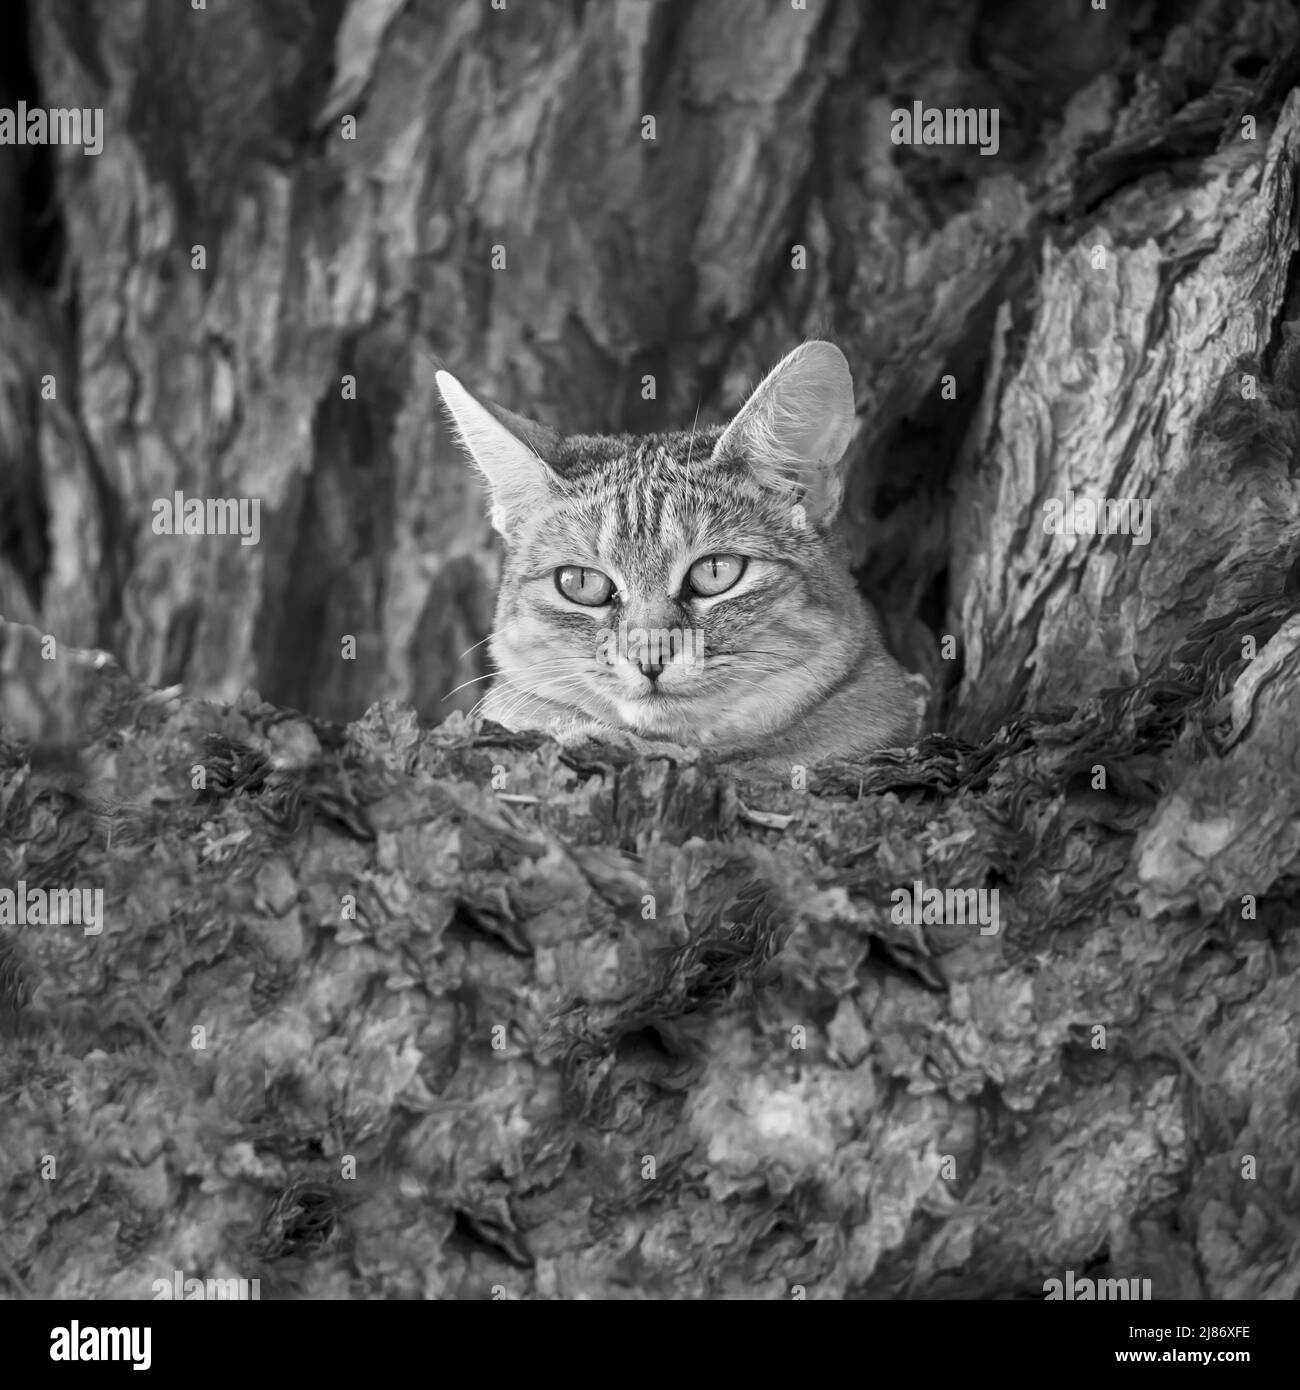 Southern African wildcat hidding in a tree trunk in Kgalagadi transfrontier park, South Africa; specie Felis silvestris cafra family of Felidae Stock Photo